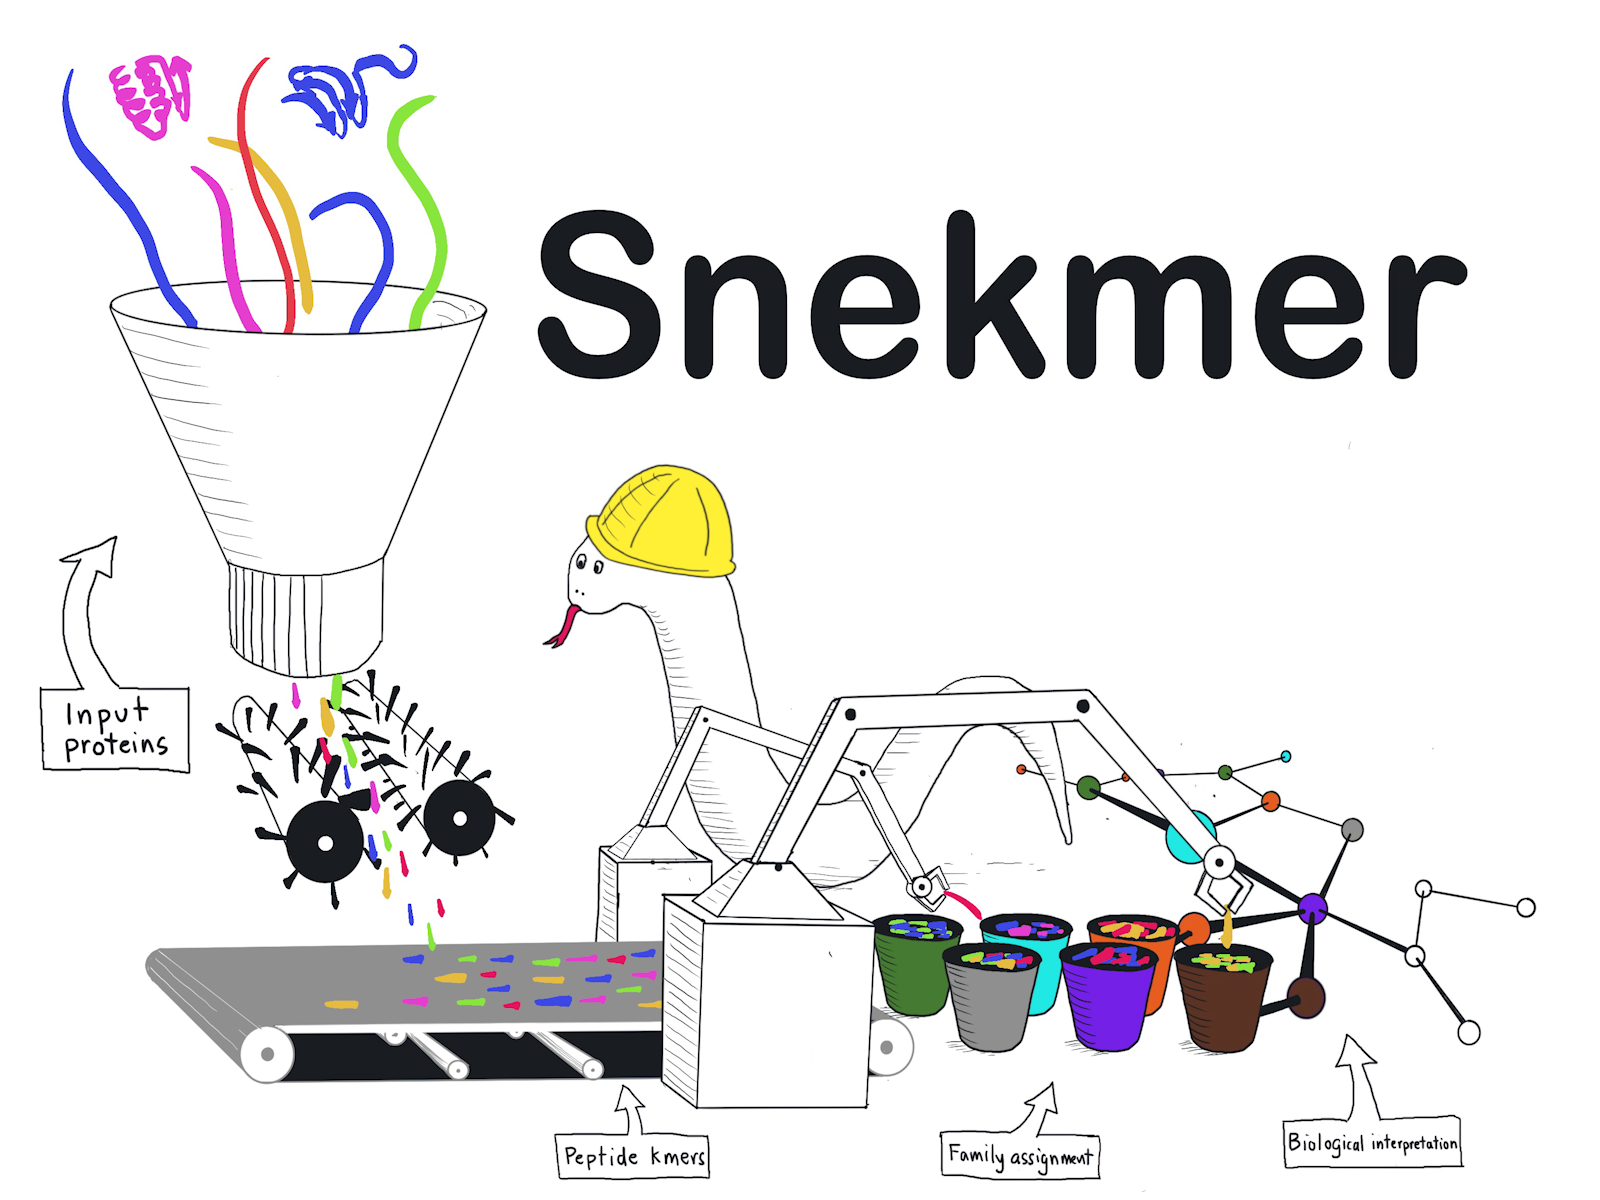 Cartoon illustration of a snake in a hardhat dropping input proteins into a funnel grinder, resulting in peptide kmers landing on a conveyer belt, which are then sorted into buckets labeled "family assignment" and "biological interpretation."